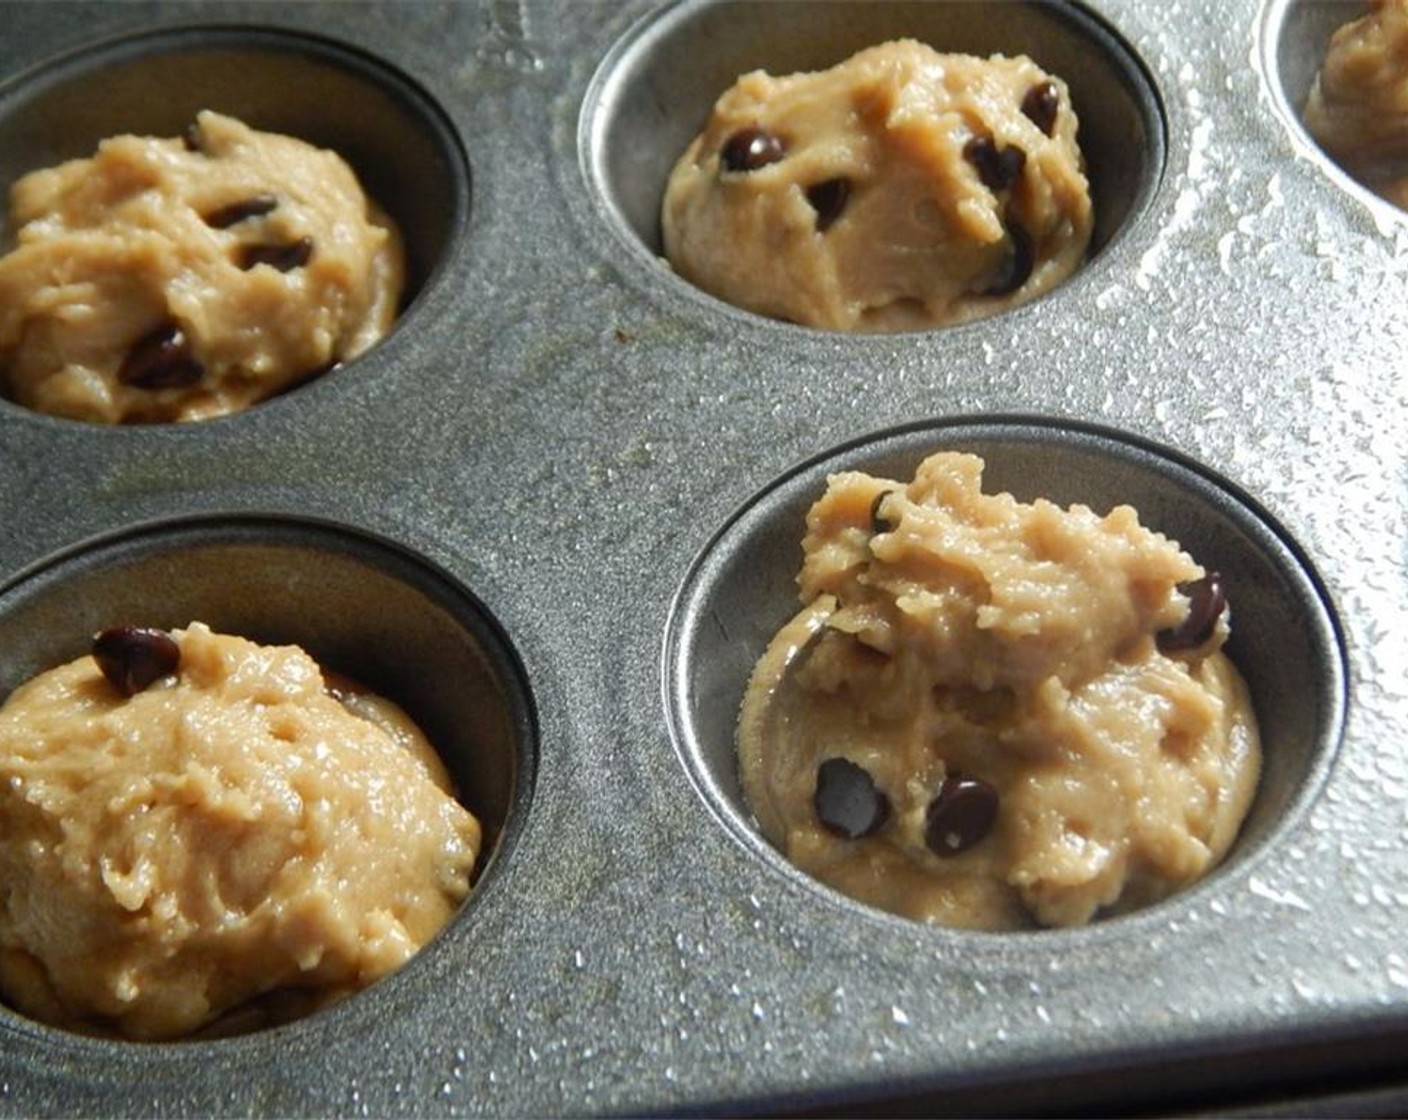 step 4 Top with the remaining cookie batter. Bake in oven for 8 to 10 minutes.